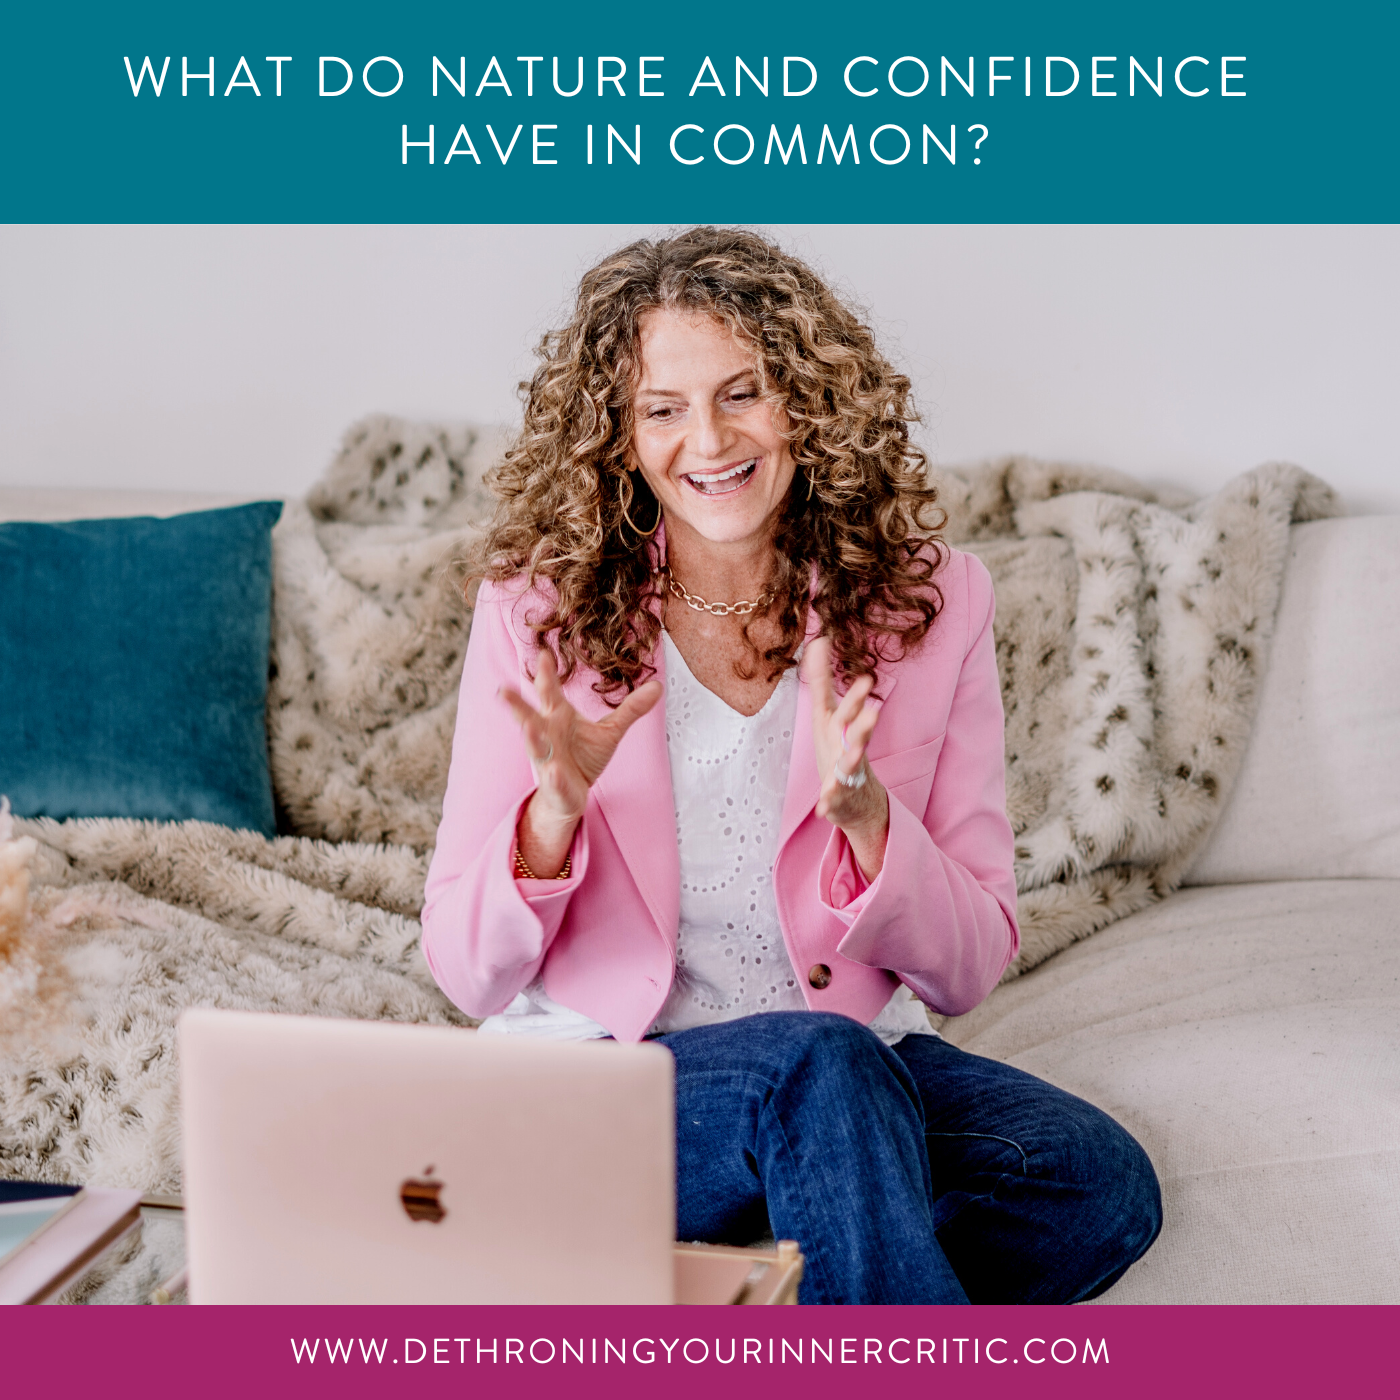 What do nature and confidence have in common?